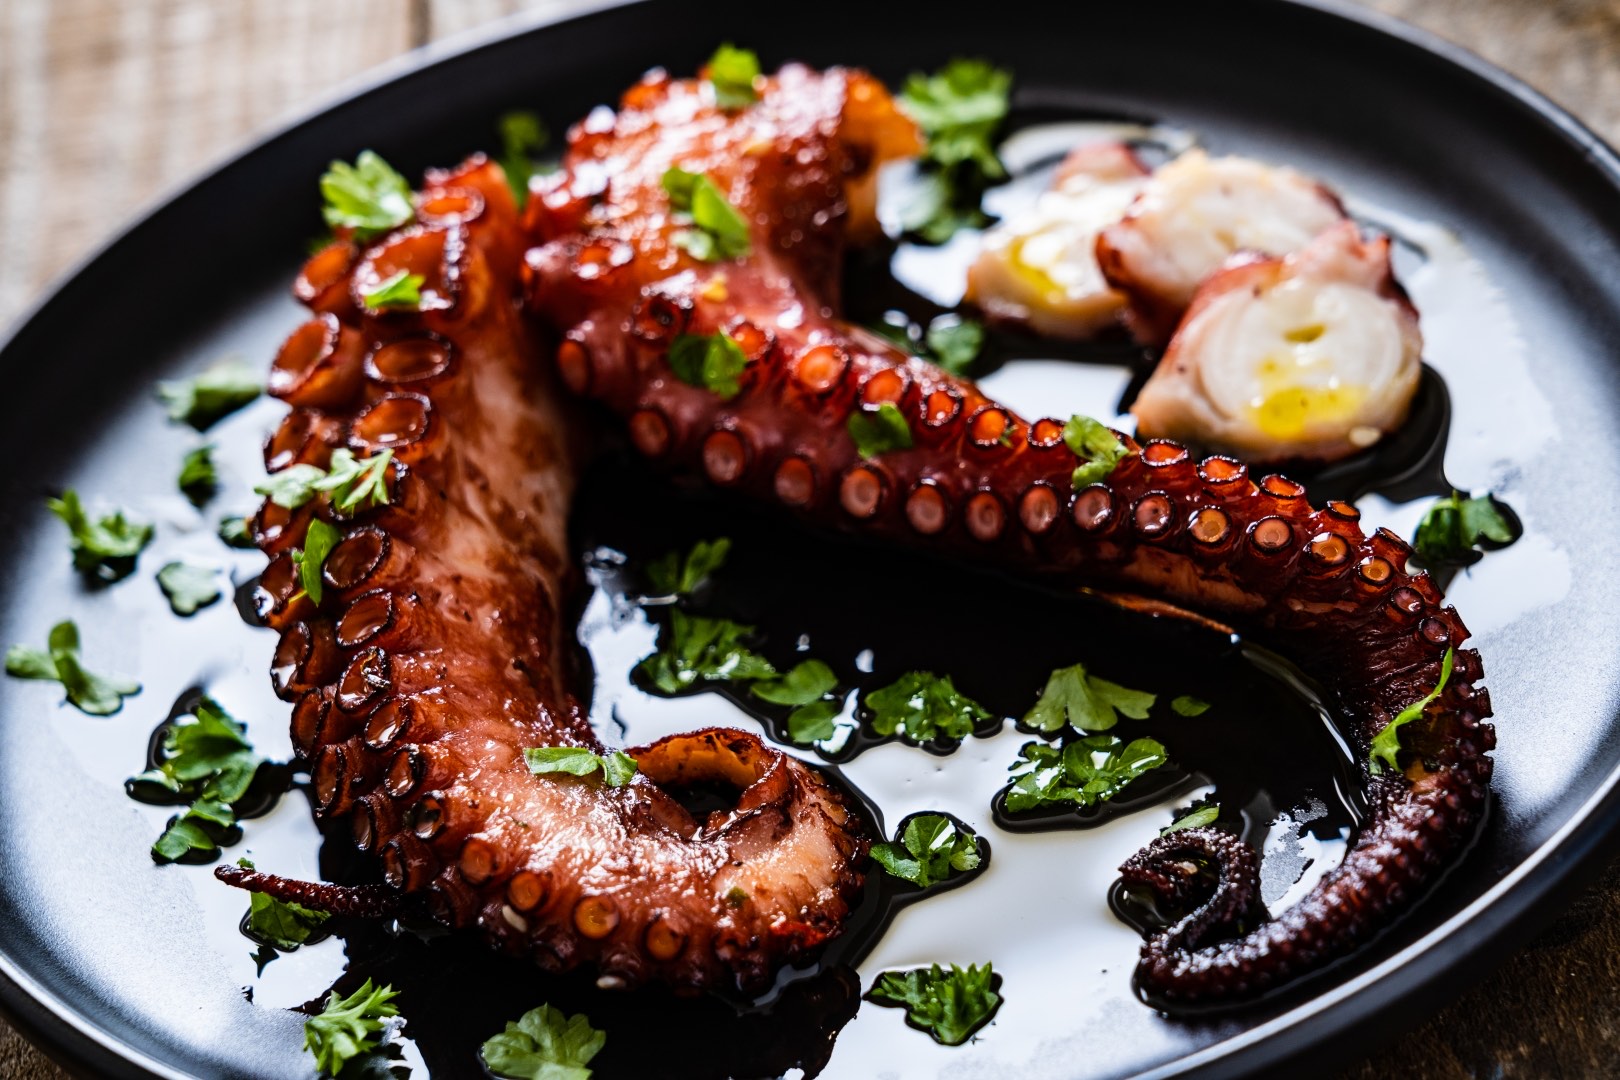 Octopus dish from Dominican Republic